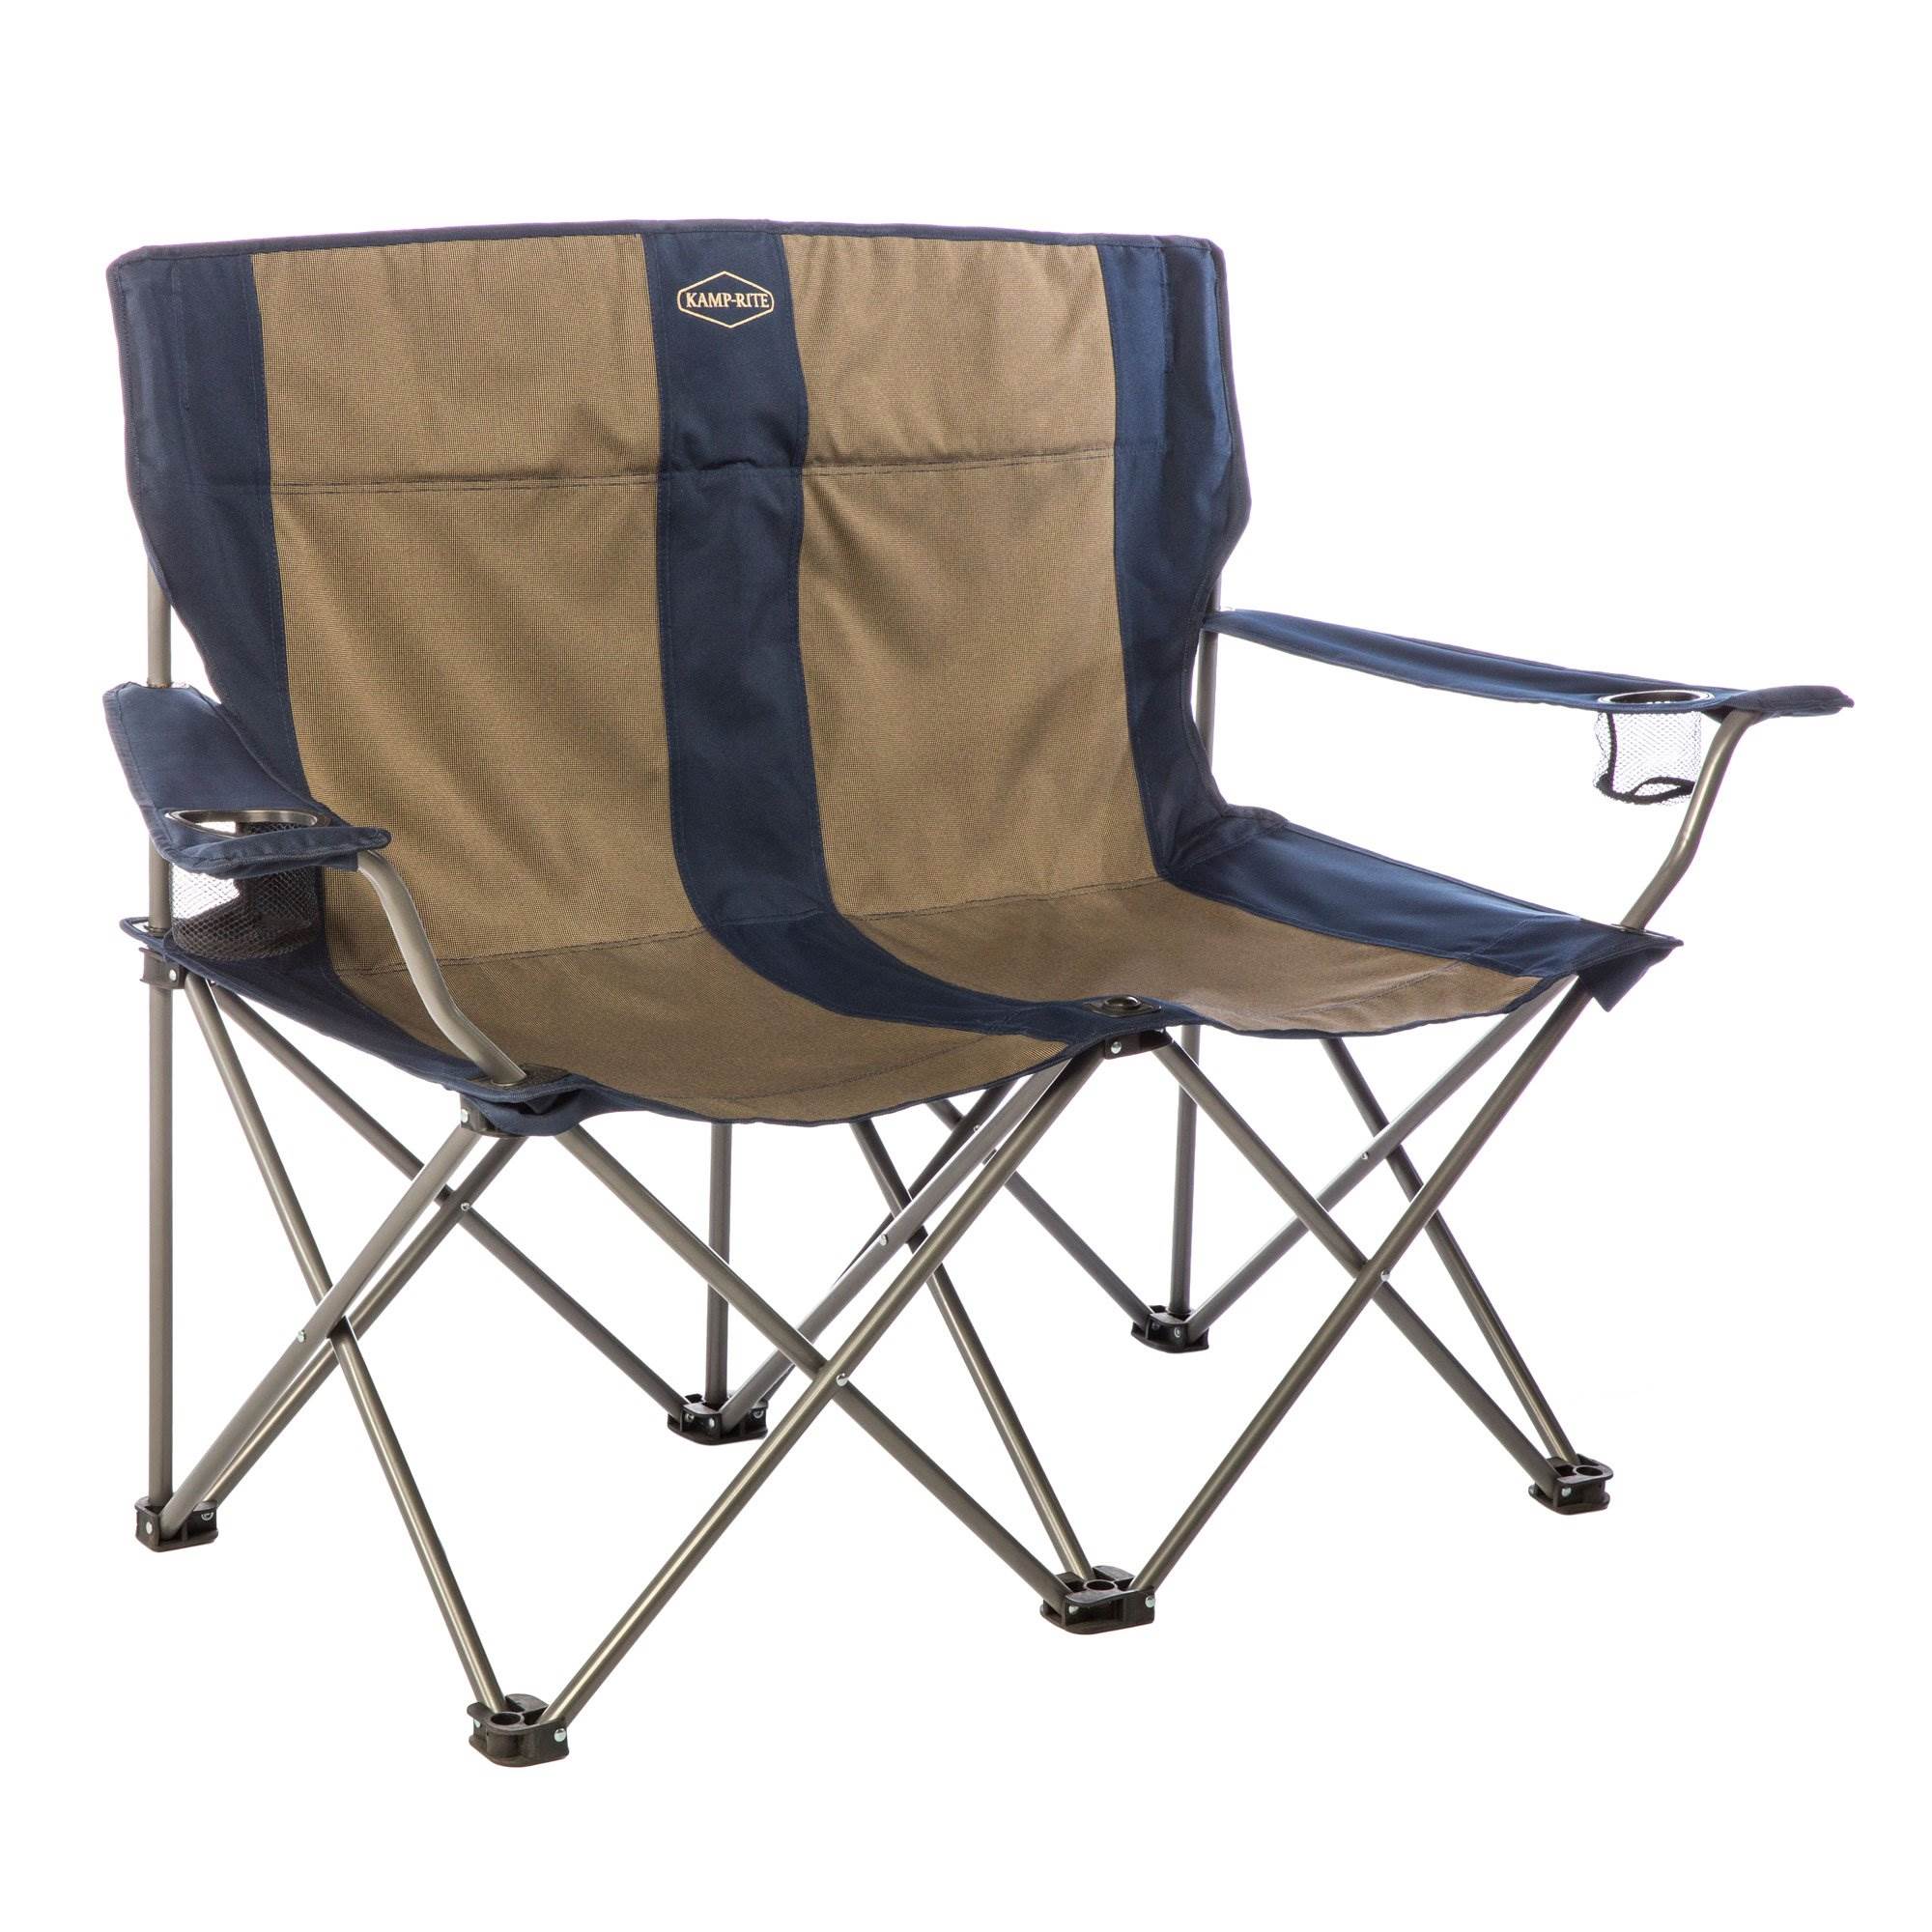 details about kamprite cc352 2 person outdoor tailgating camping double  folding lawn chair